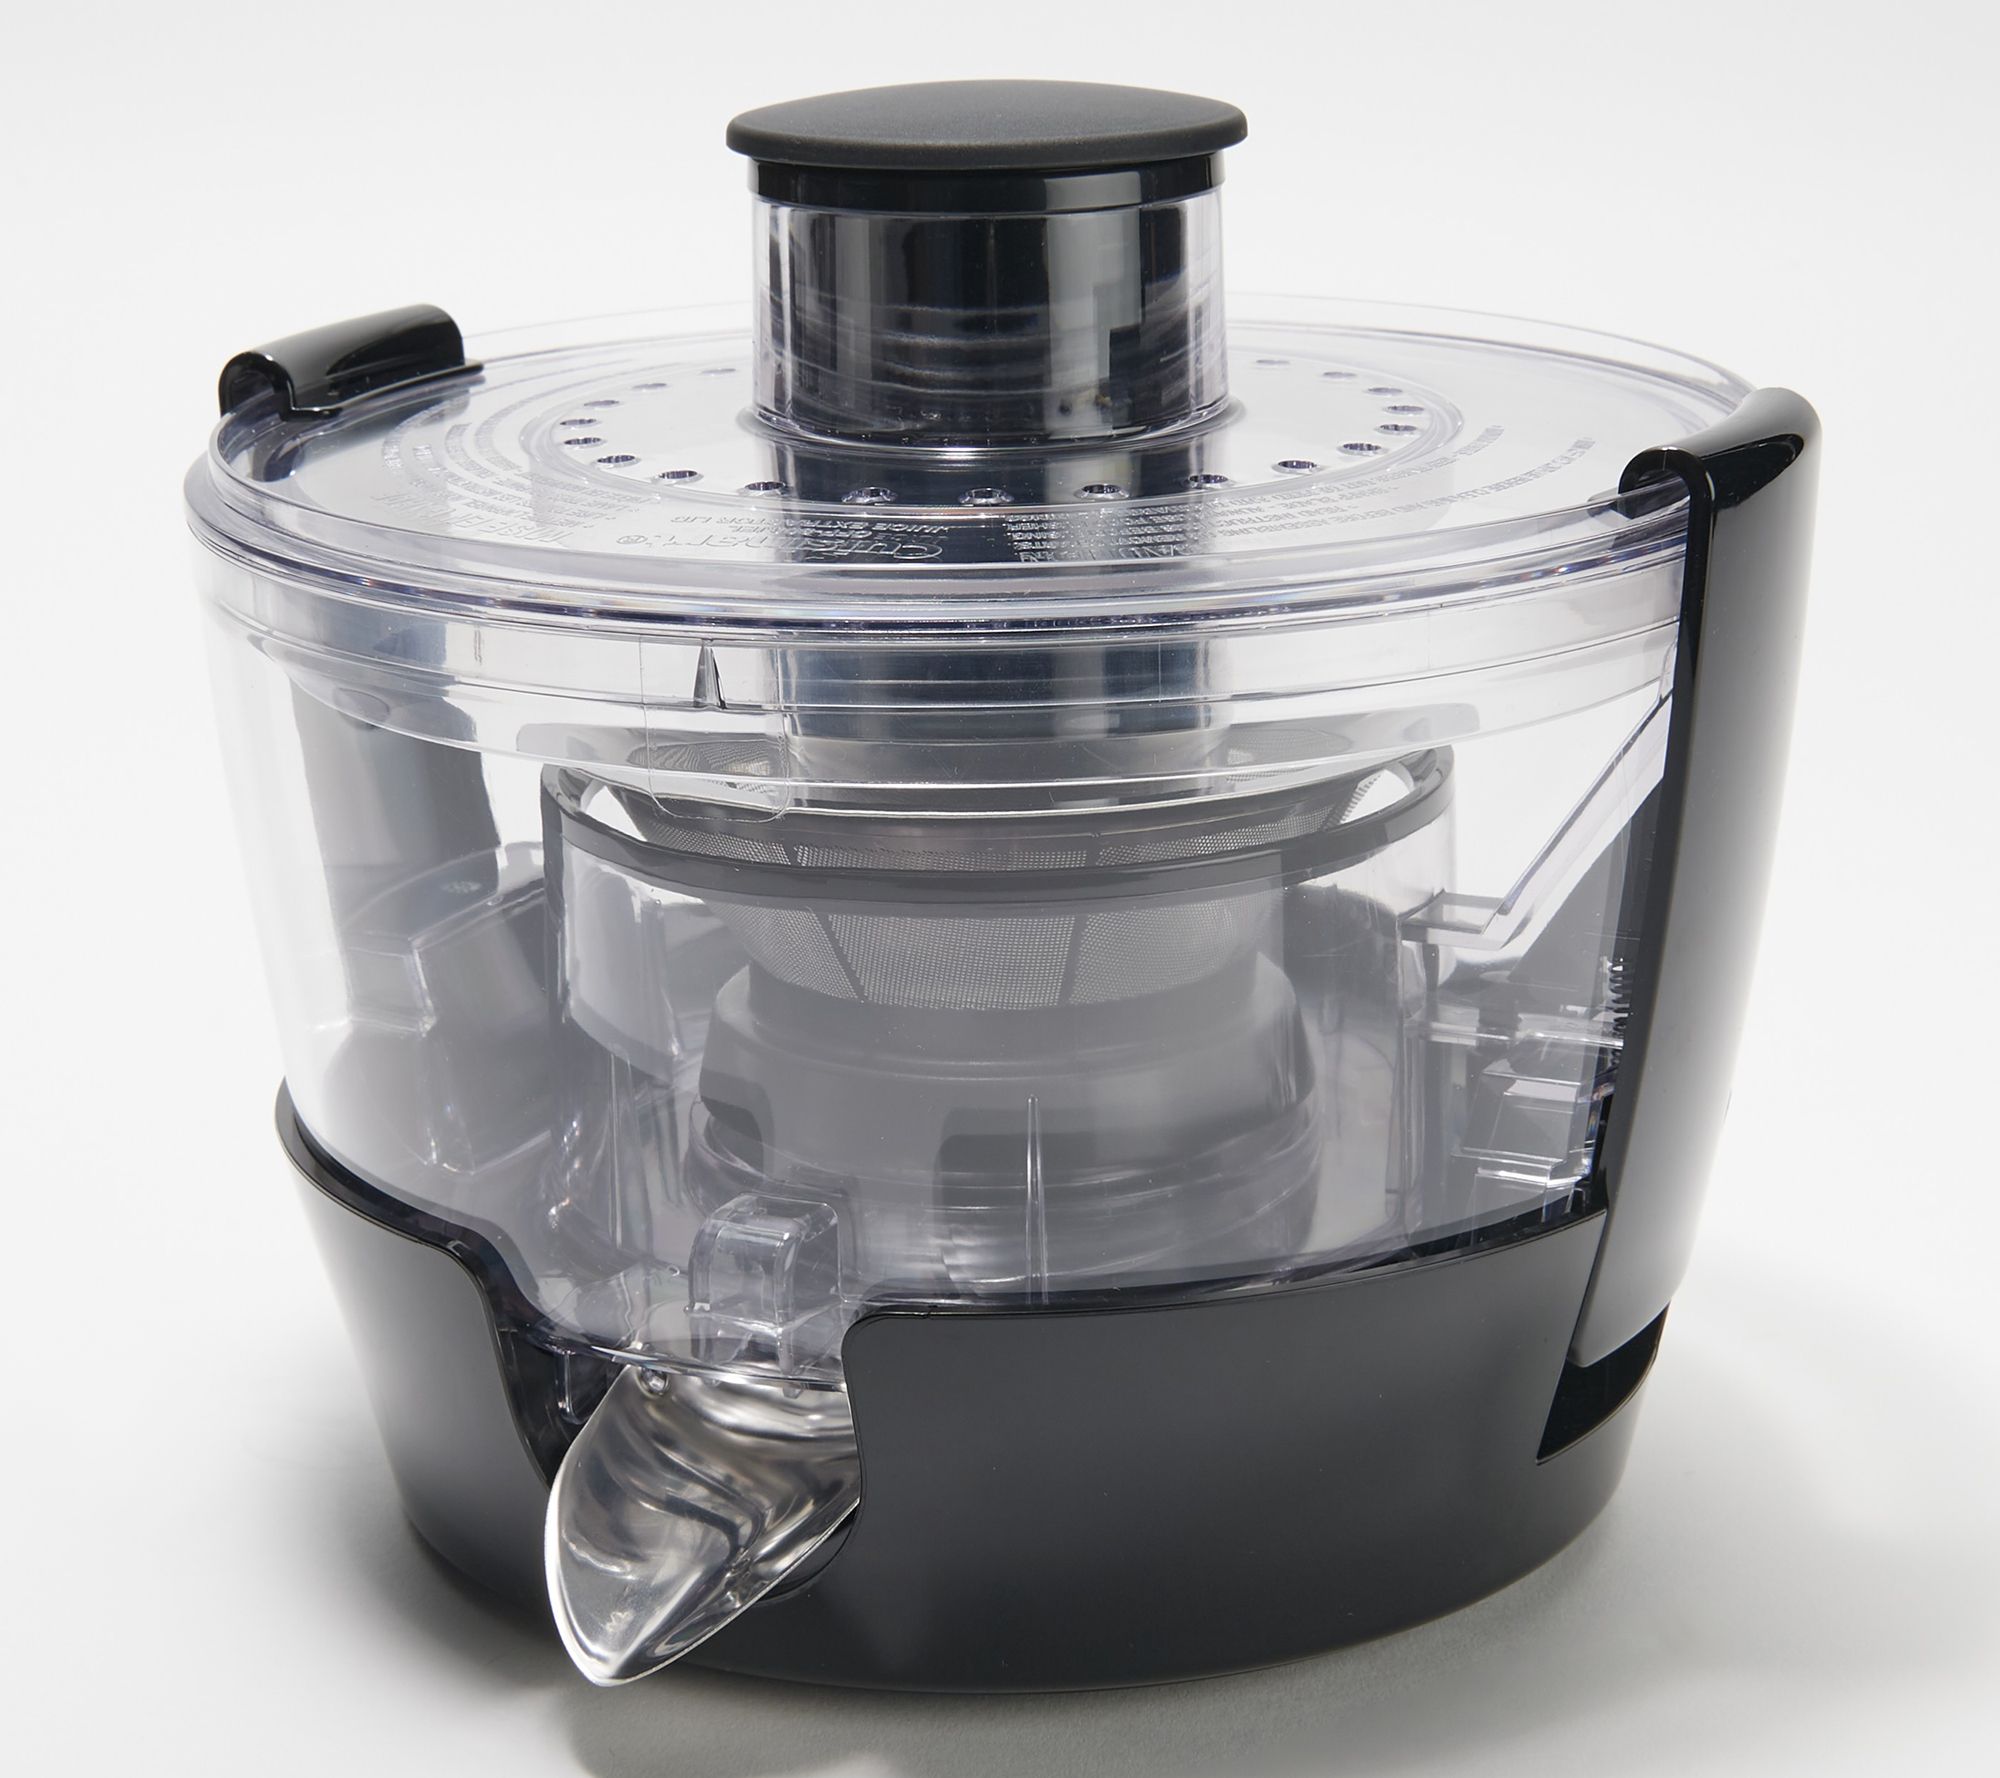 Cuisinart - Kitchen Central 3 in 1 Food Processor